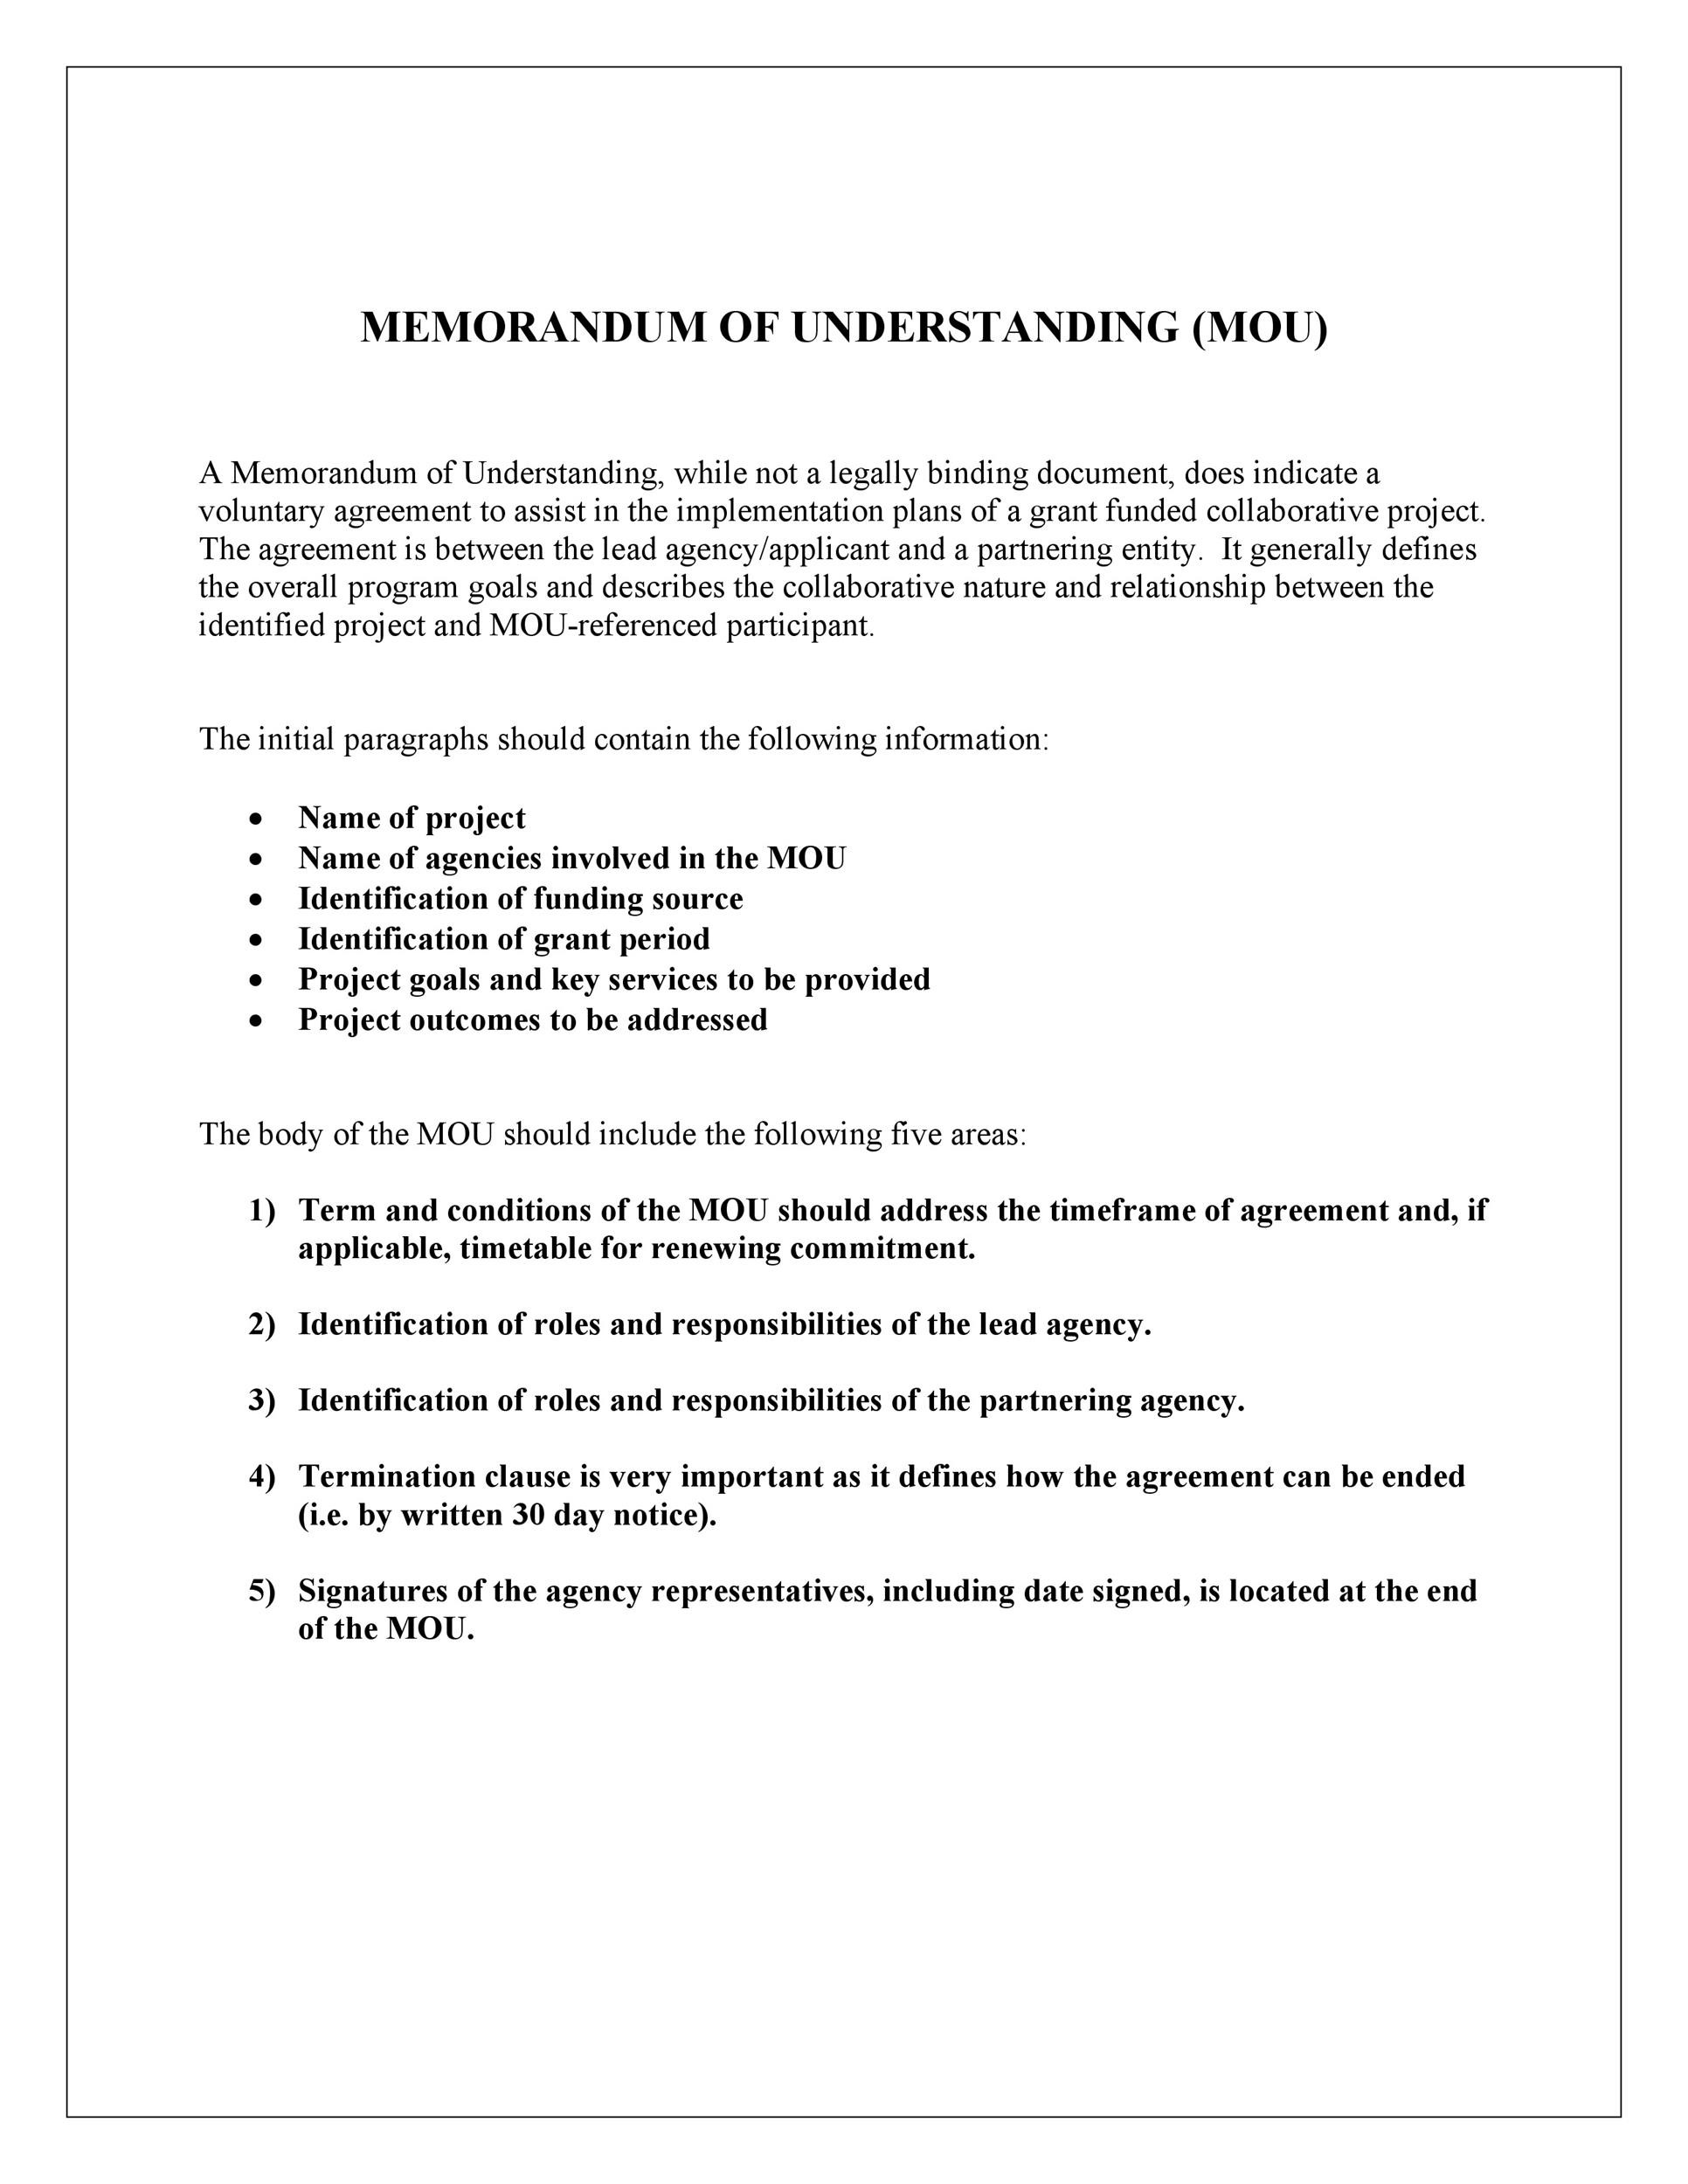 Letter Of Understanding Template 50 Free Memorandum Of Understanding Templates [word]